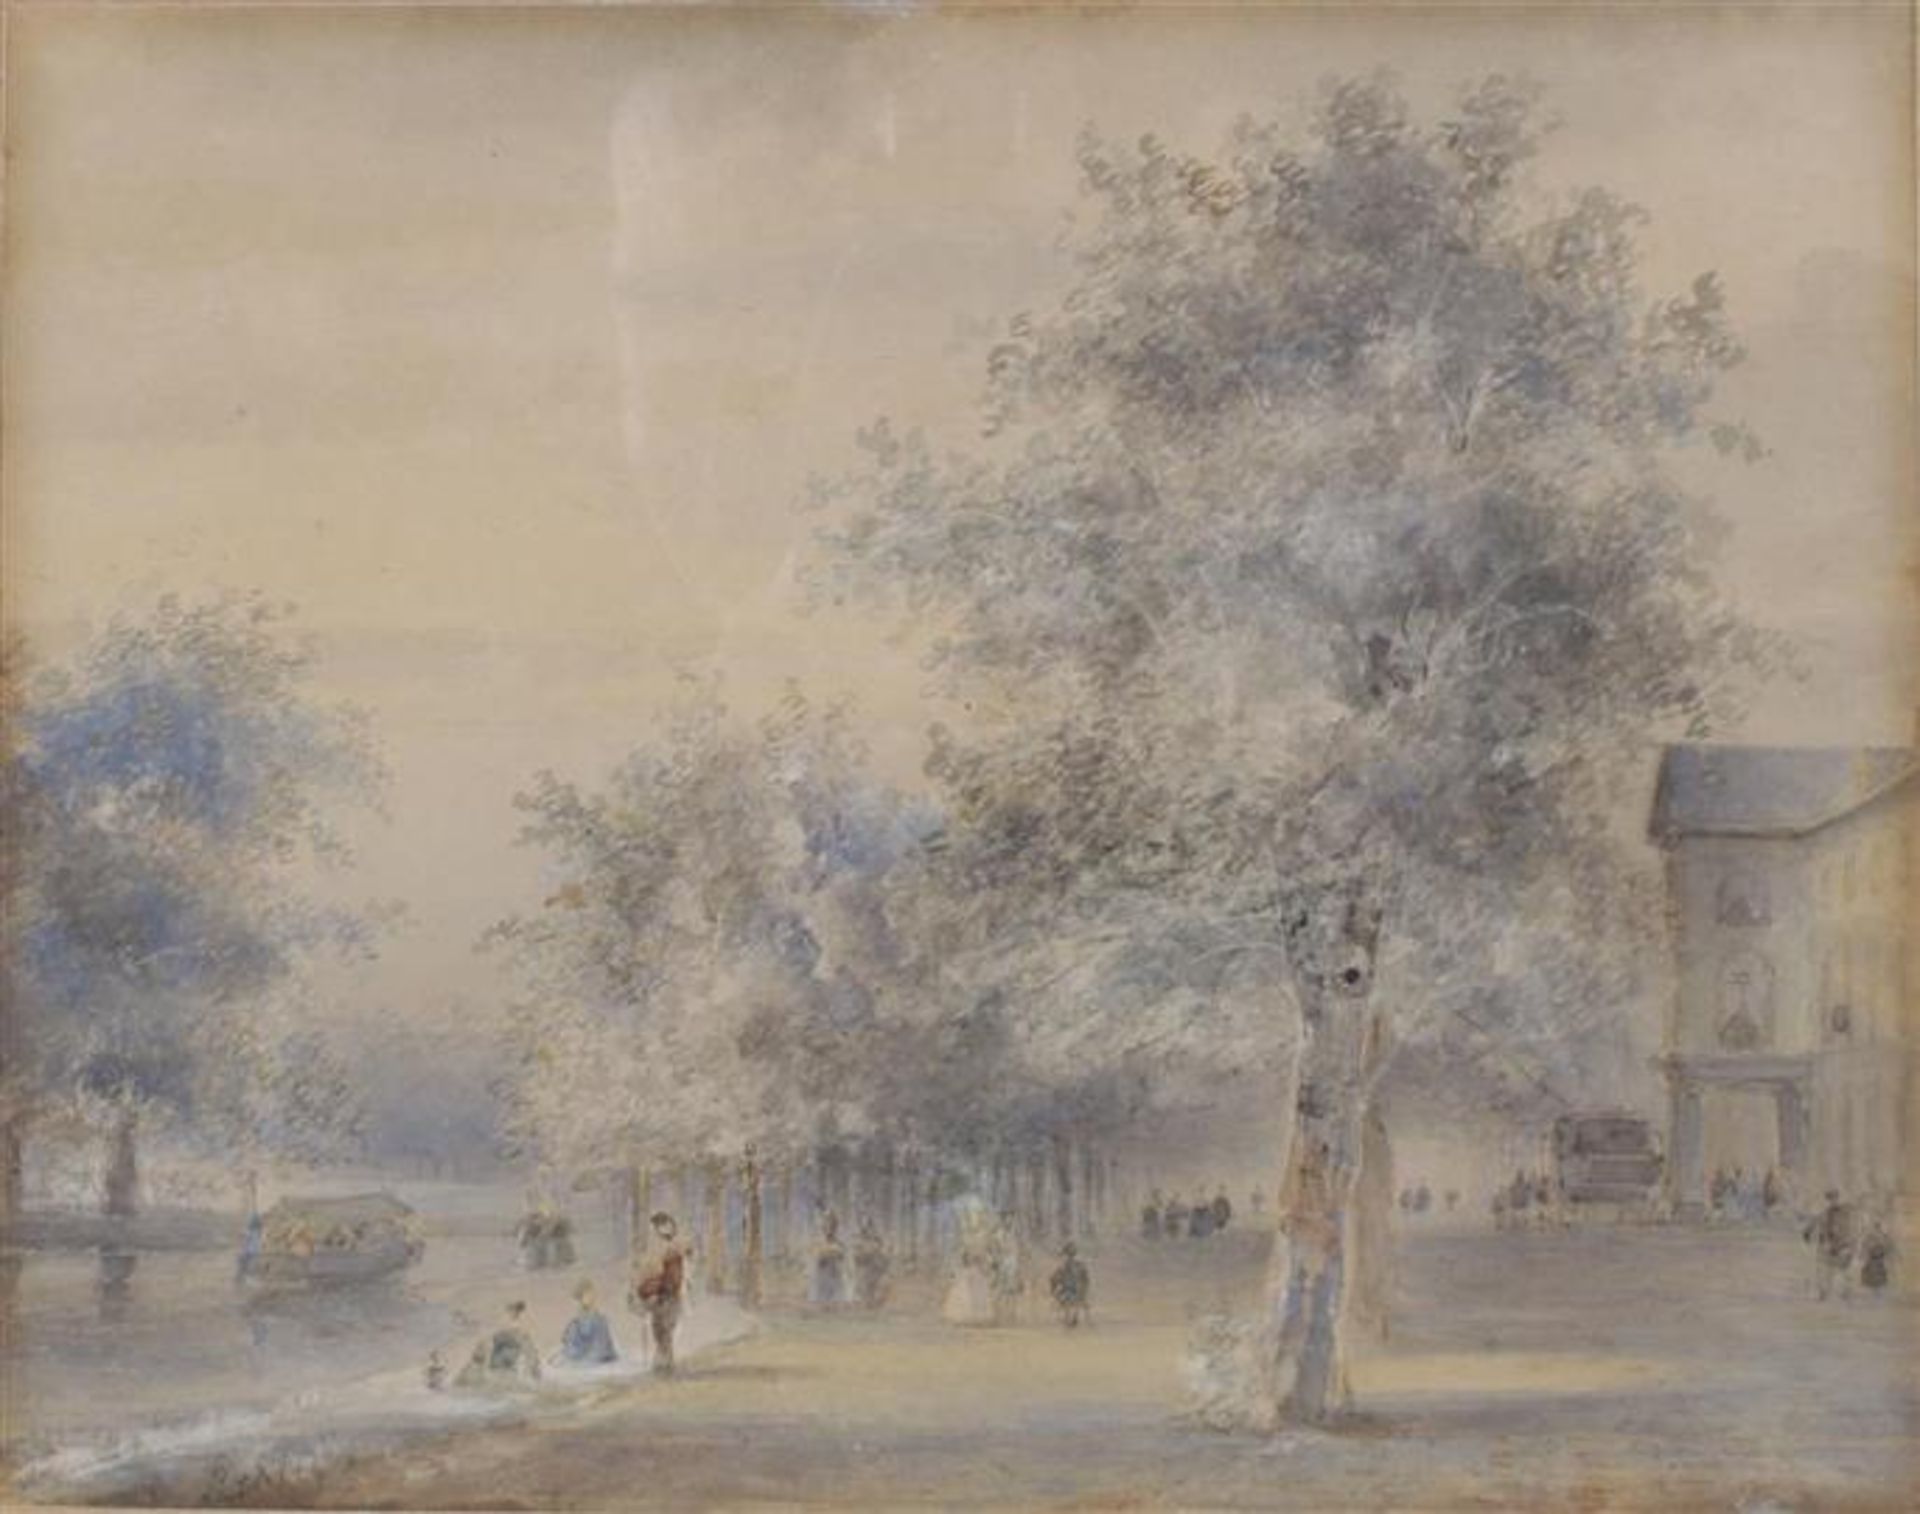 Bottom left remains of signature, cityscape with figures on a river under a tree, watercolor 16x20 - Bild 2 aus 3